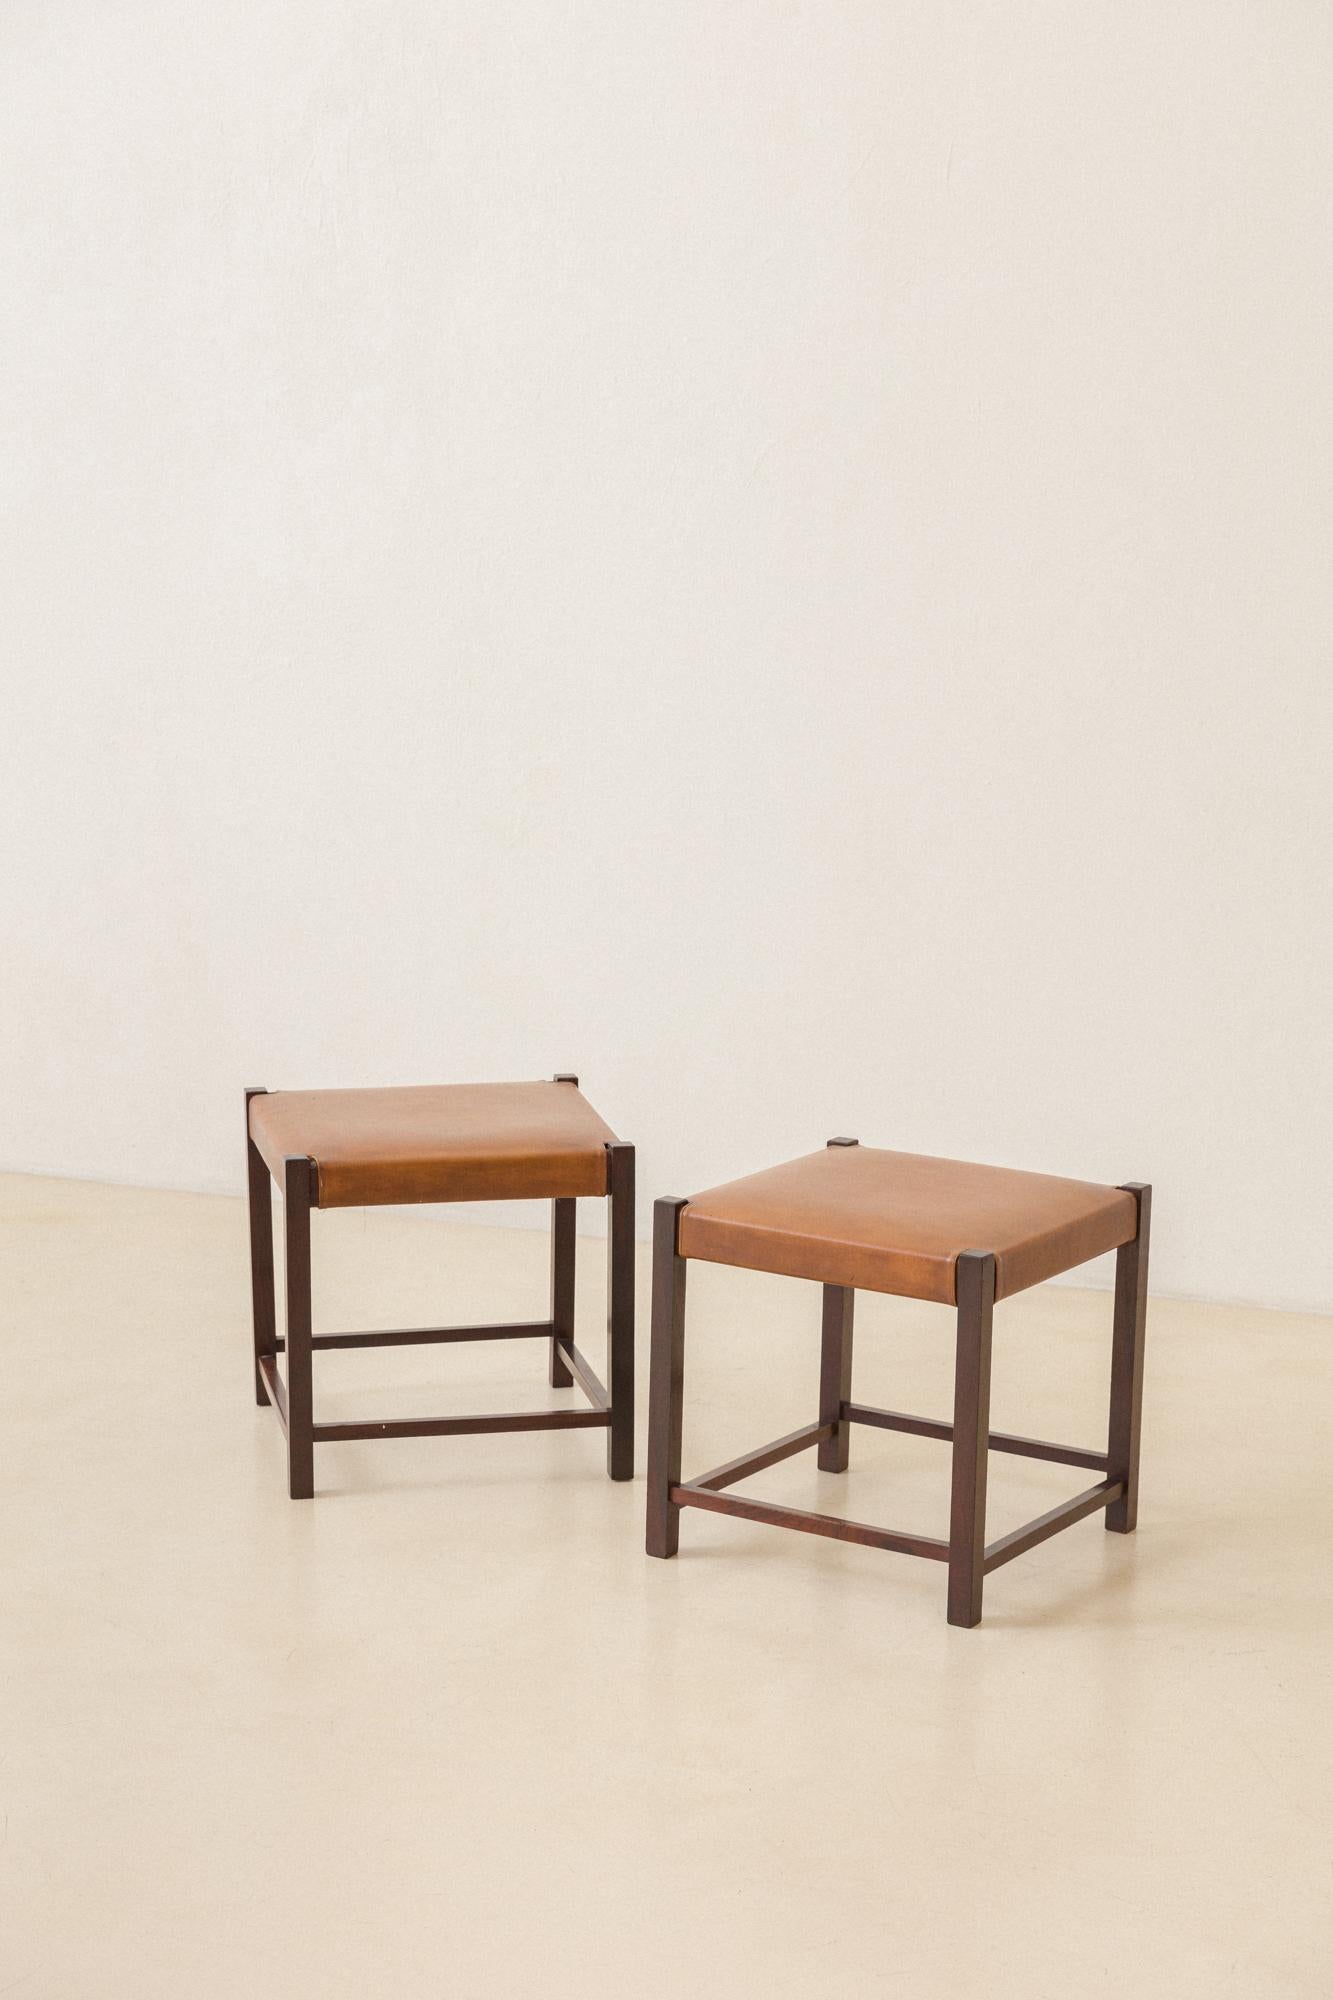 Mid-20th Century Pair of Brazilian Vintage Rosewood and Leather Stools, Unknown Designer, 1960s For Sale